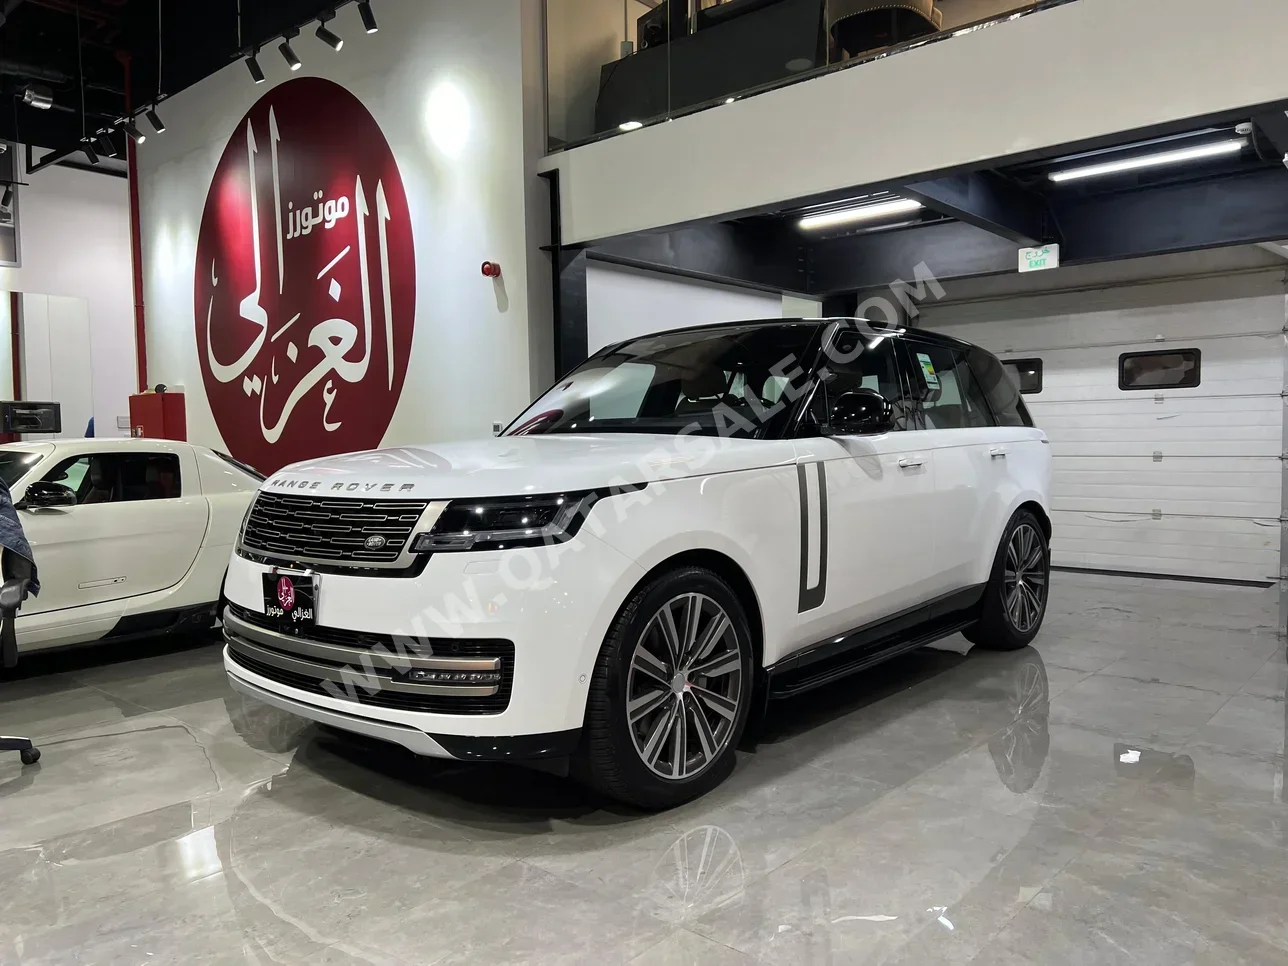 Land Rover  Range Rover  Vogue HSE  2023  Automatic  53,000 Km  6 Cylinder  Four Wheel Drive (4WD)  SUV  White  With Warranty